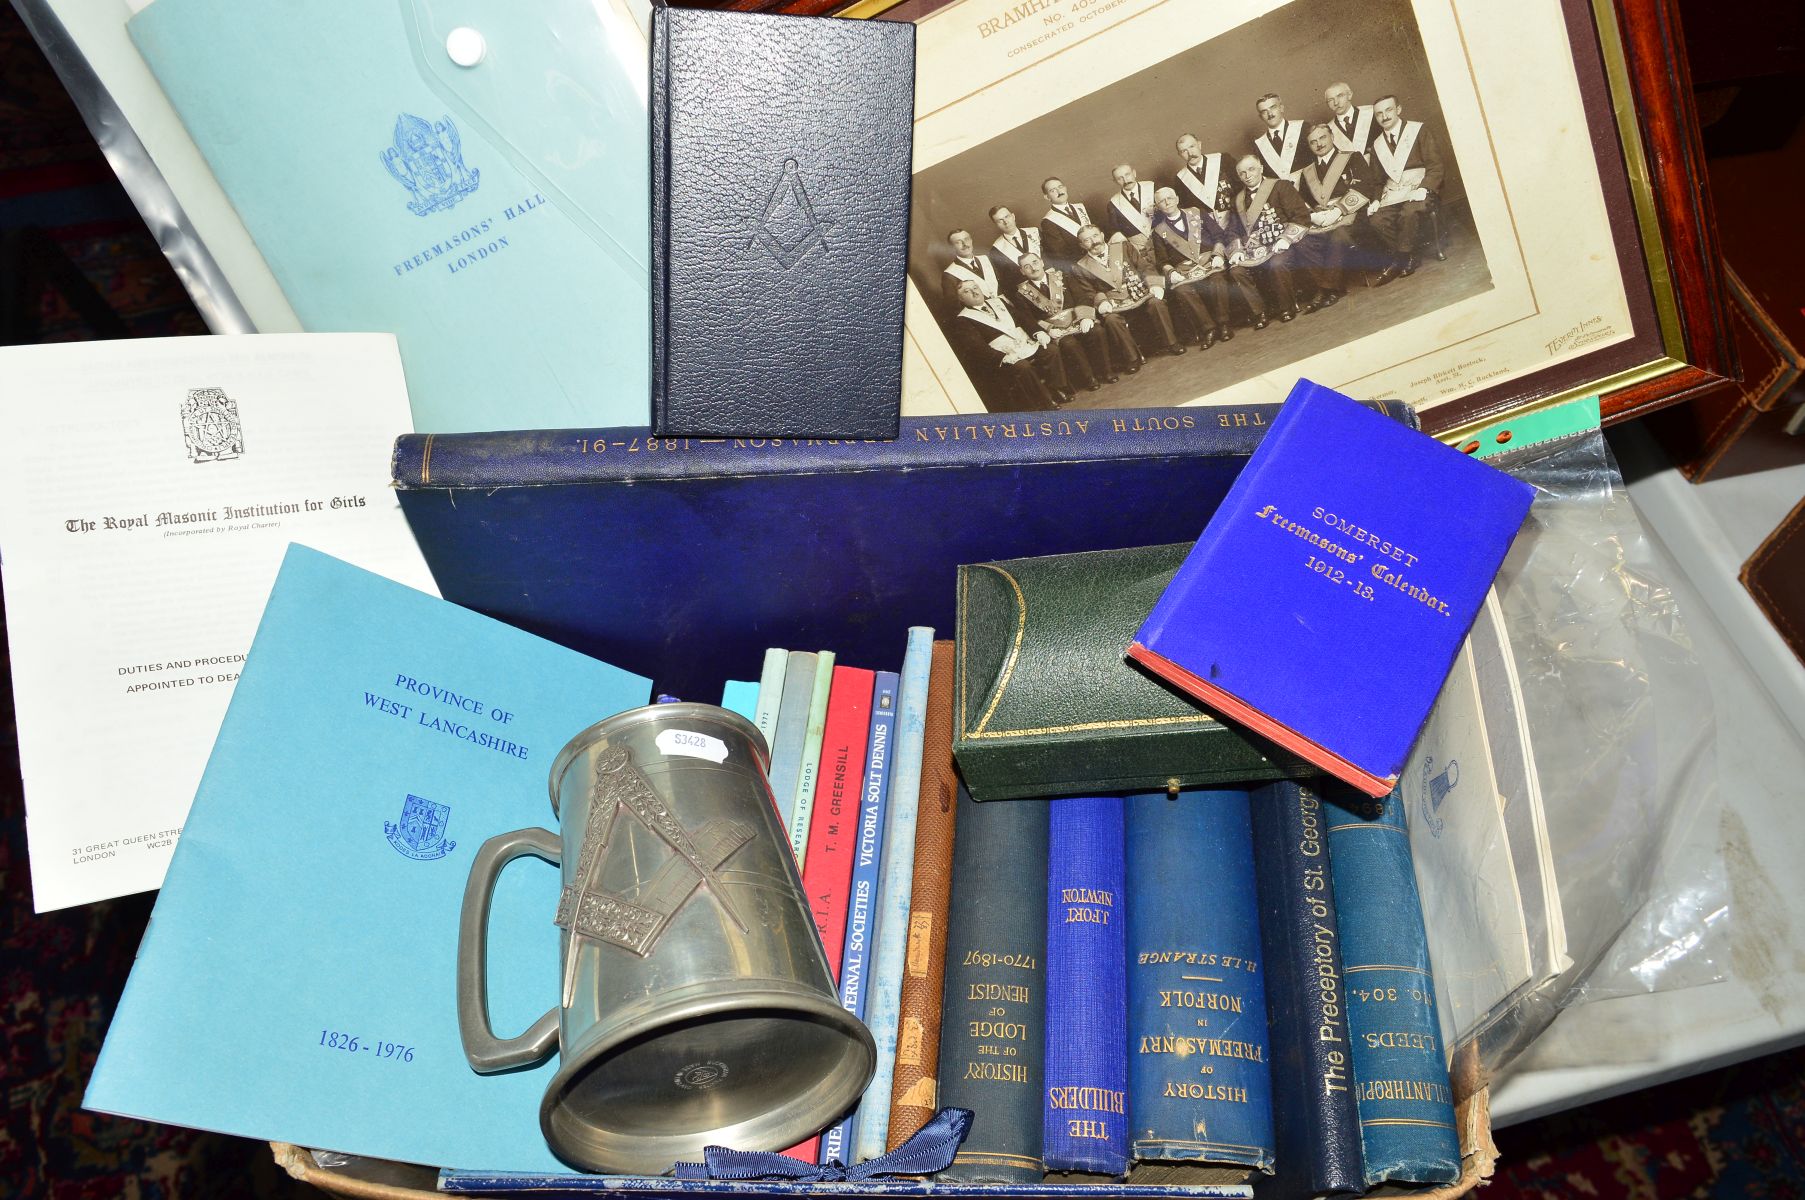 A BOX OF FREEMASONS BOOKS, PAMPHLETS, pewter tankard, etc, including a framed photograph ofm members